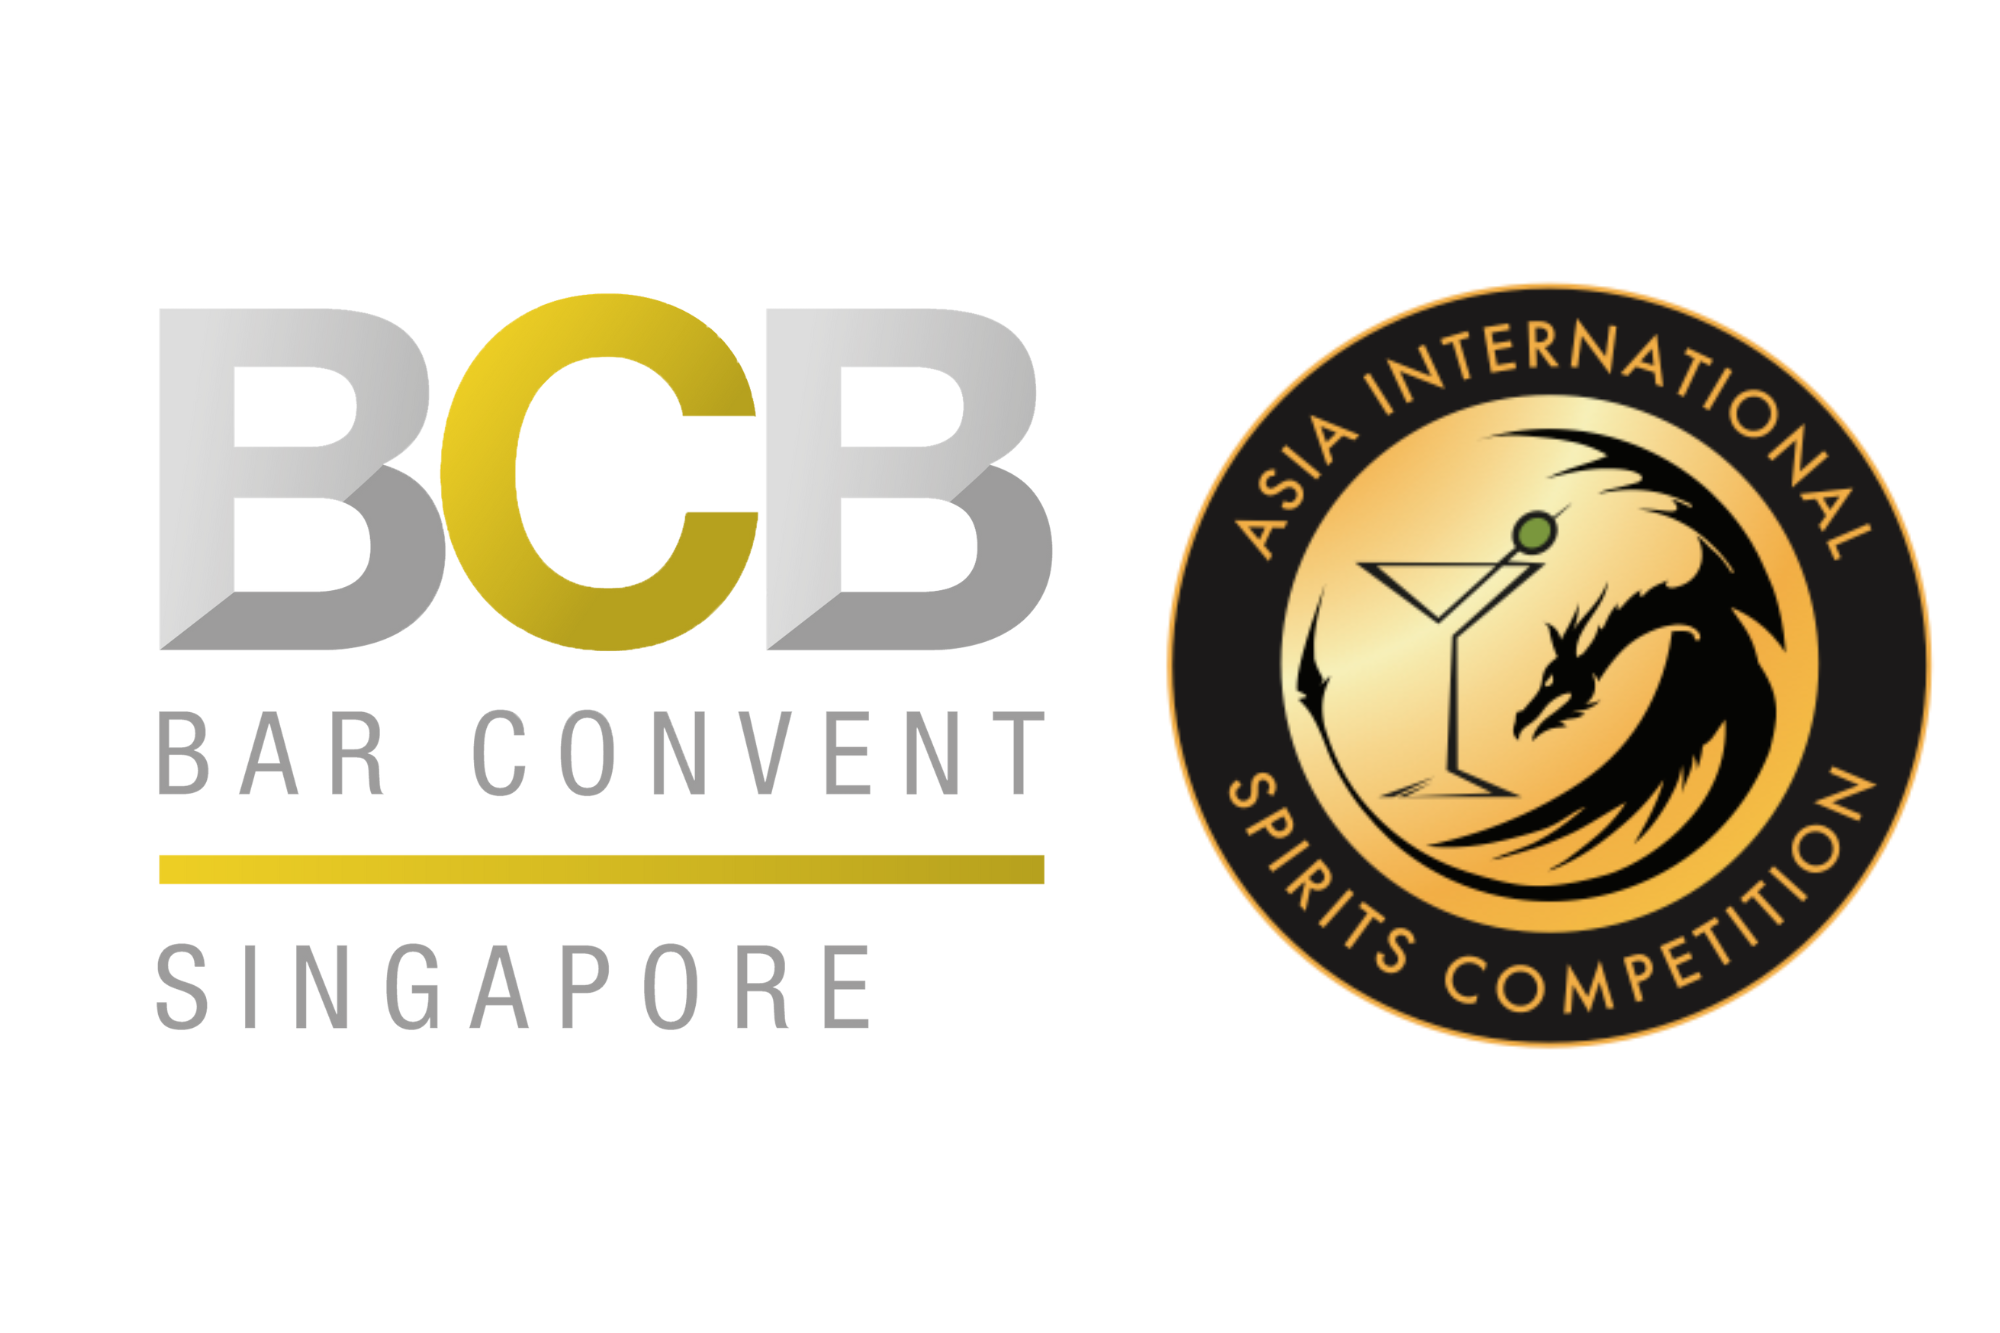 International Beverage Competitions at Inaugural Bar Convent Singapore